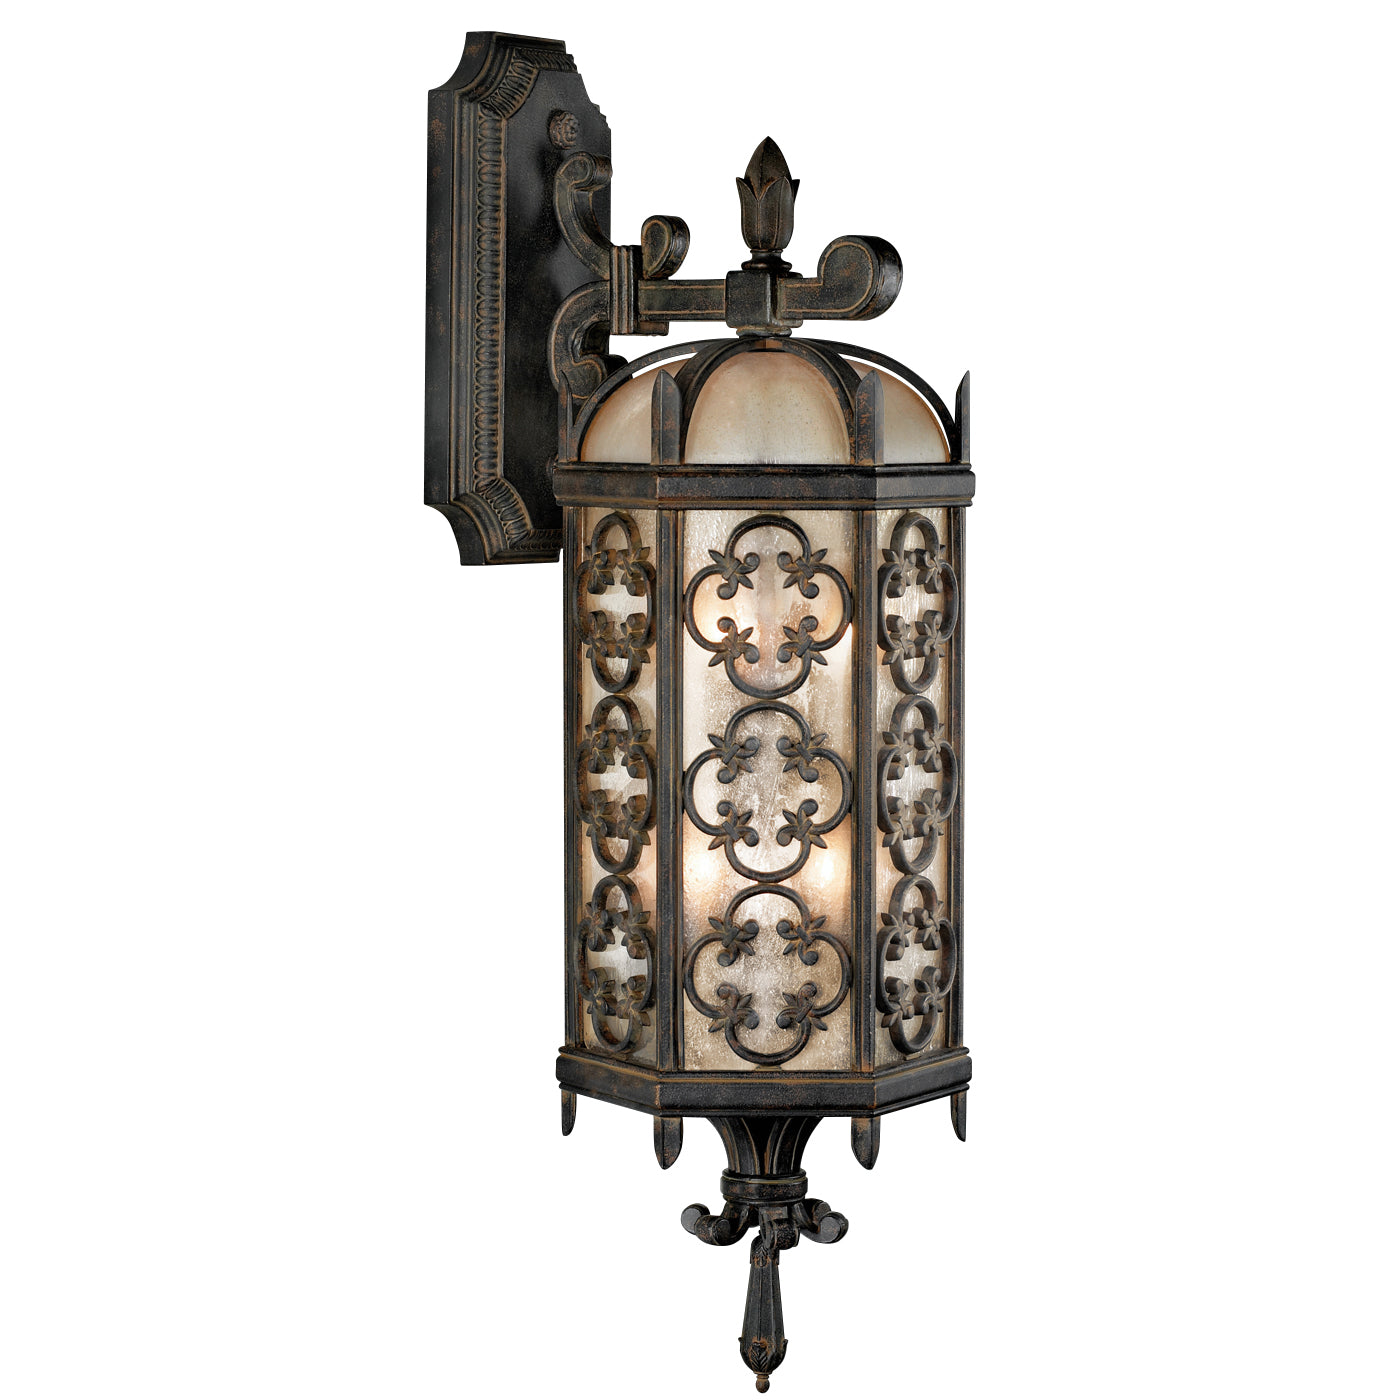 Fine Art Costa del Sol Outdoor Wall Mount Outdoor l Wall Fine Art Handcrafted Lighting Wrought Iron 11Wx33H 